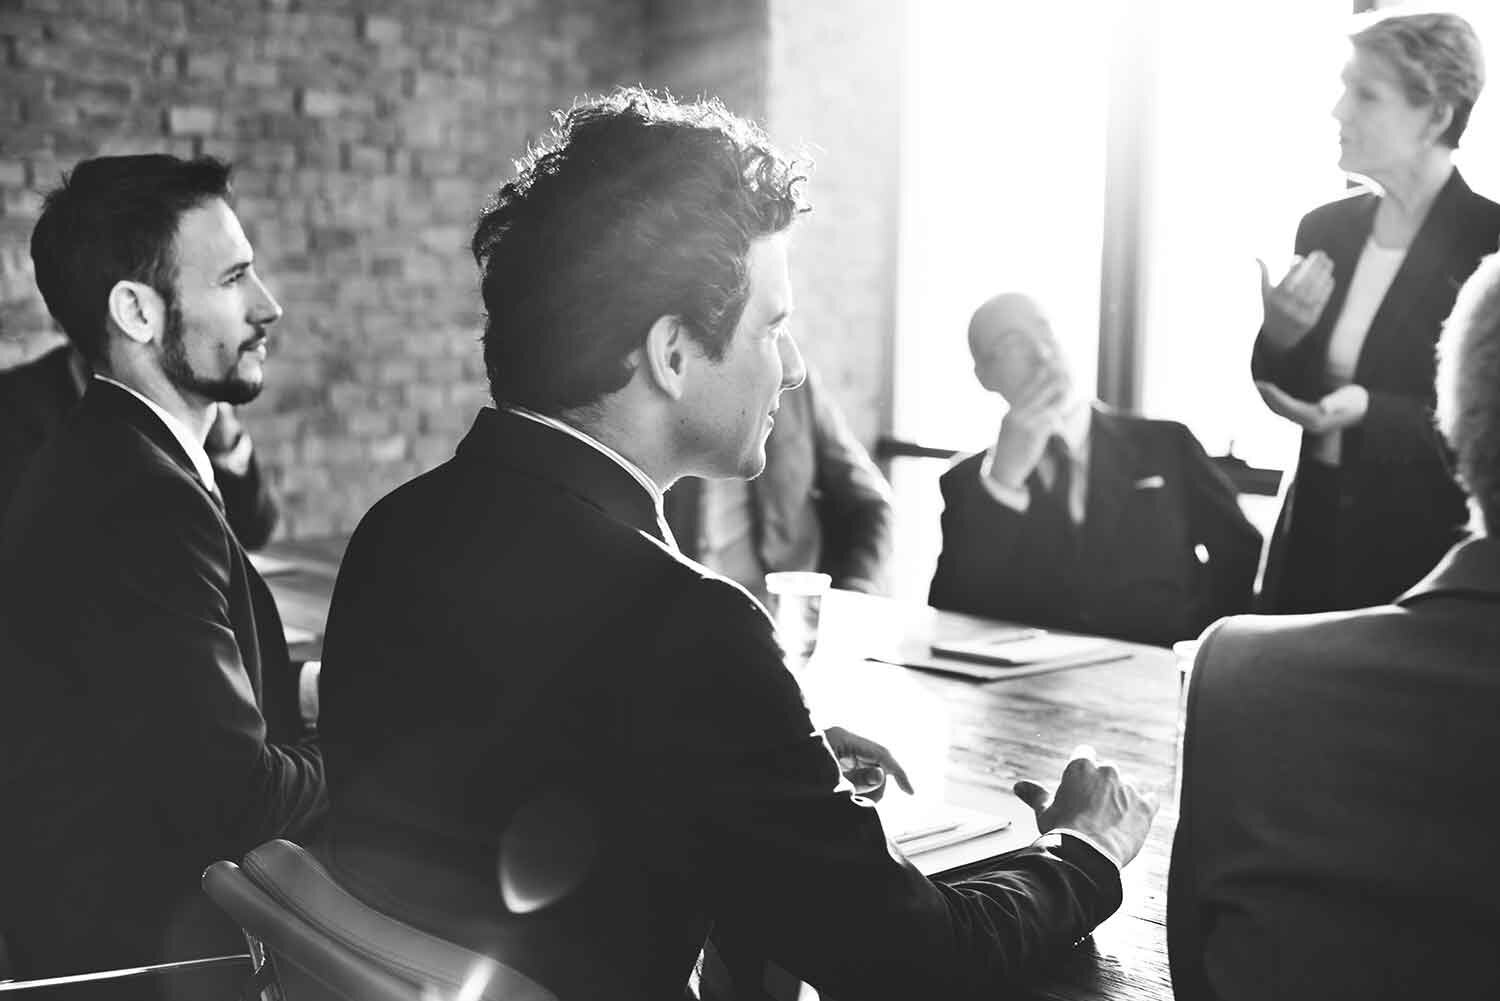 Black and white image of men and women in a meeting